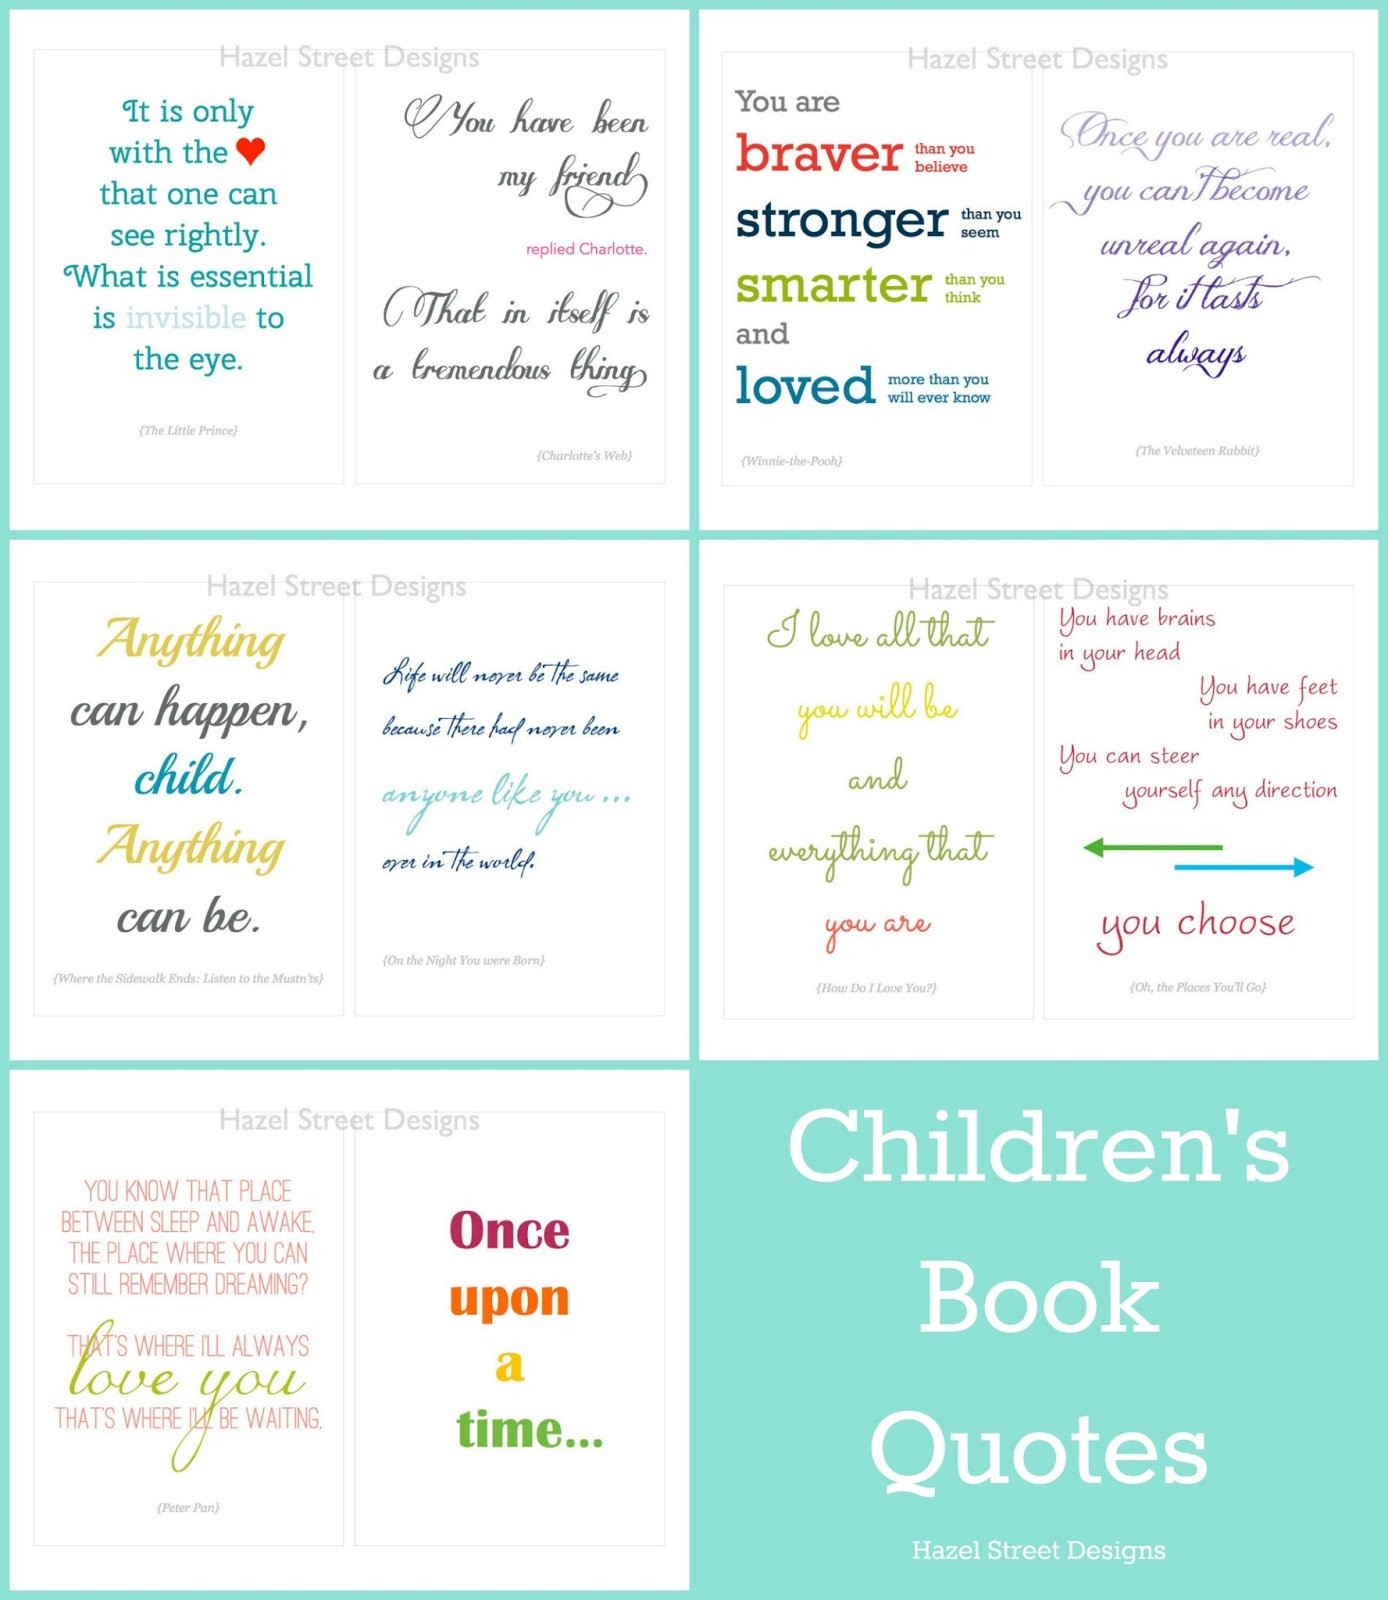 Quote For Baby Shower Book
 Living in My Pajamas New Item Children s Book Quotes